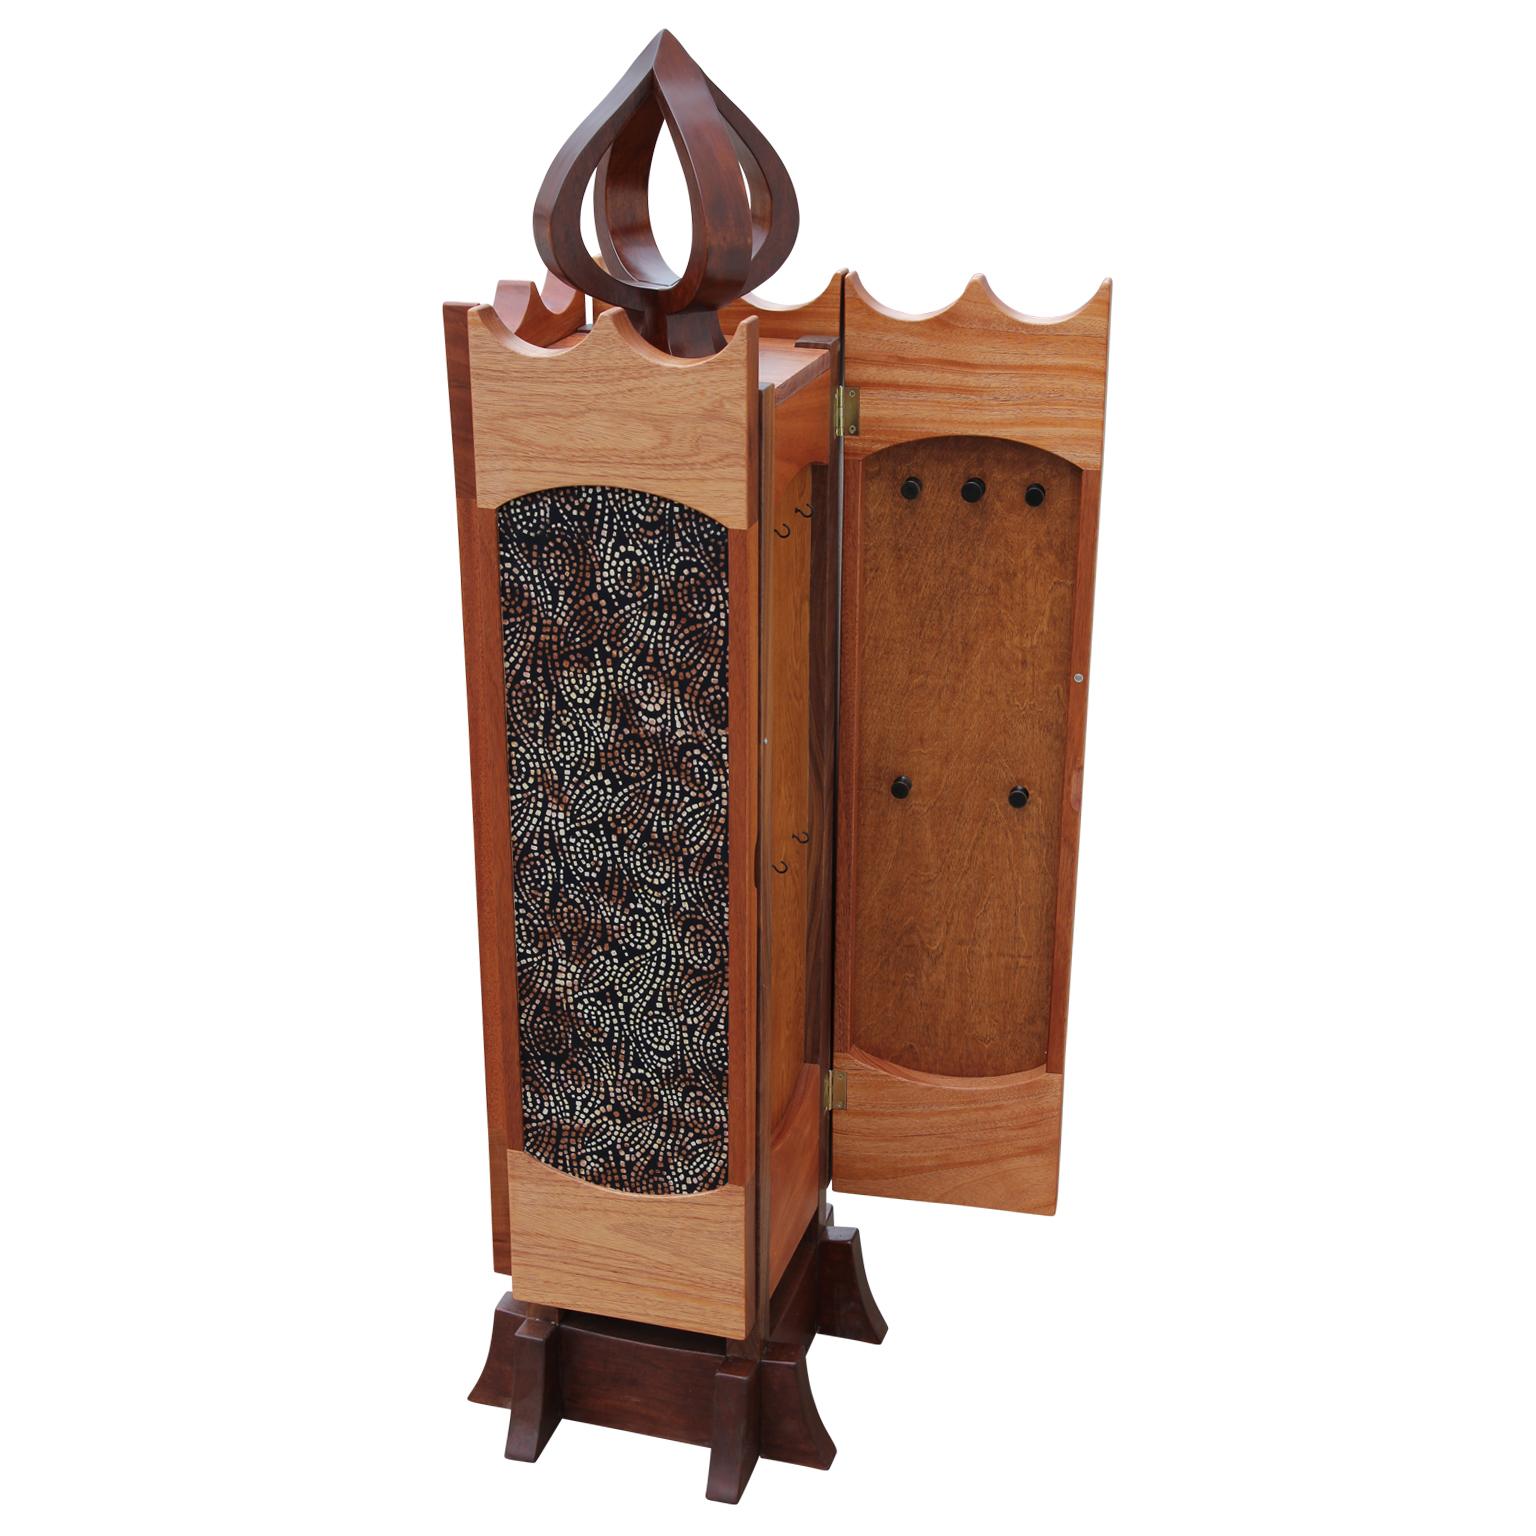 This beautiful piece by Norm Stoeker opens on three sides to reveal a variety of jewelry storage. The right and left sides open to have multiple pegs for hanging longer pieces. The front panel opens to reveal a tower of 9 drawers and a pullout /